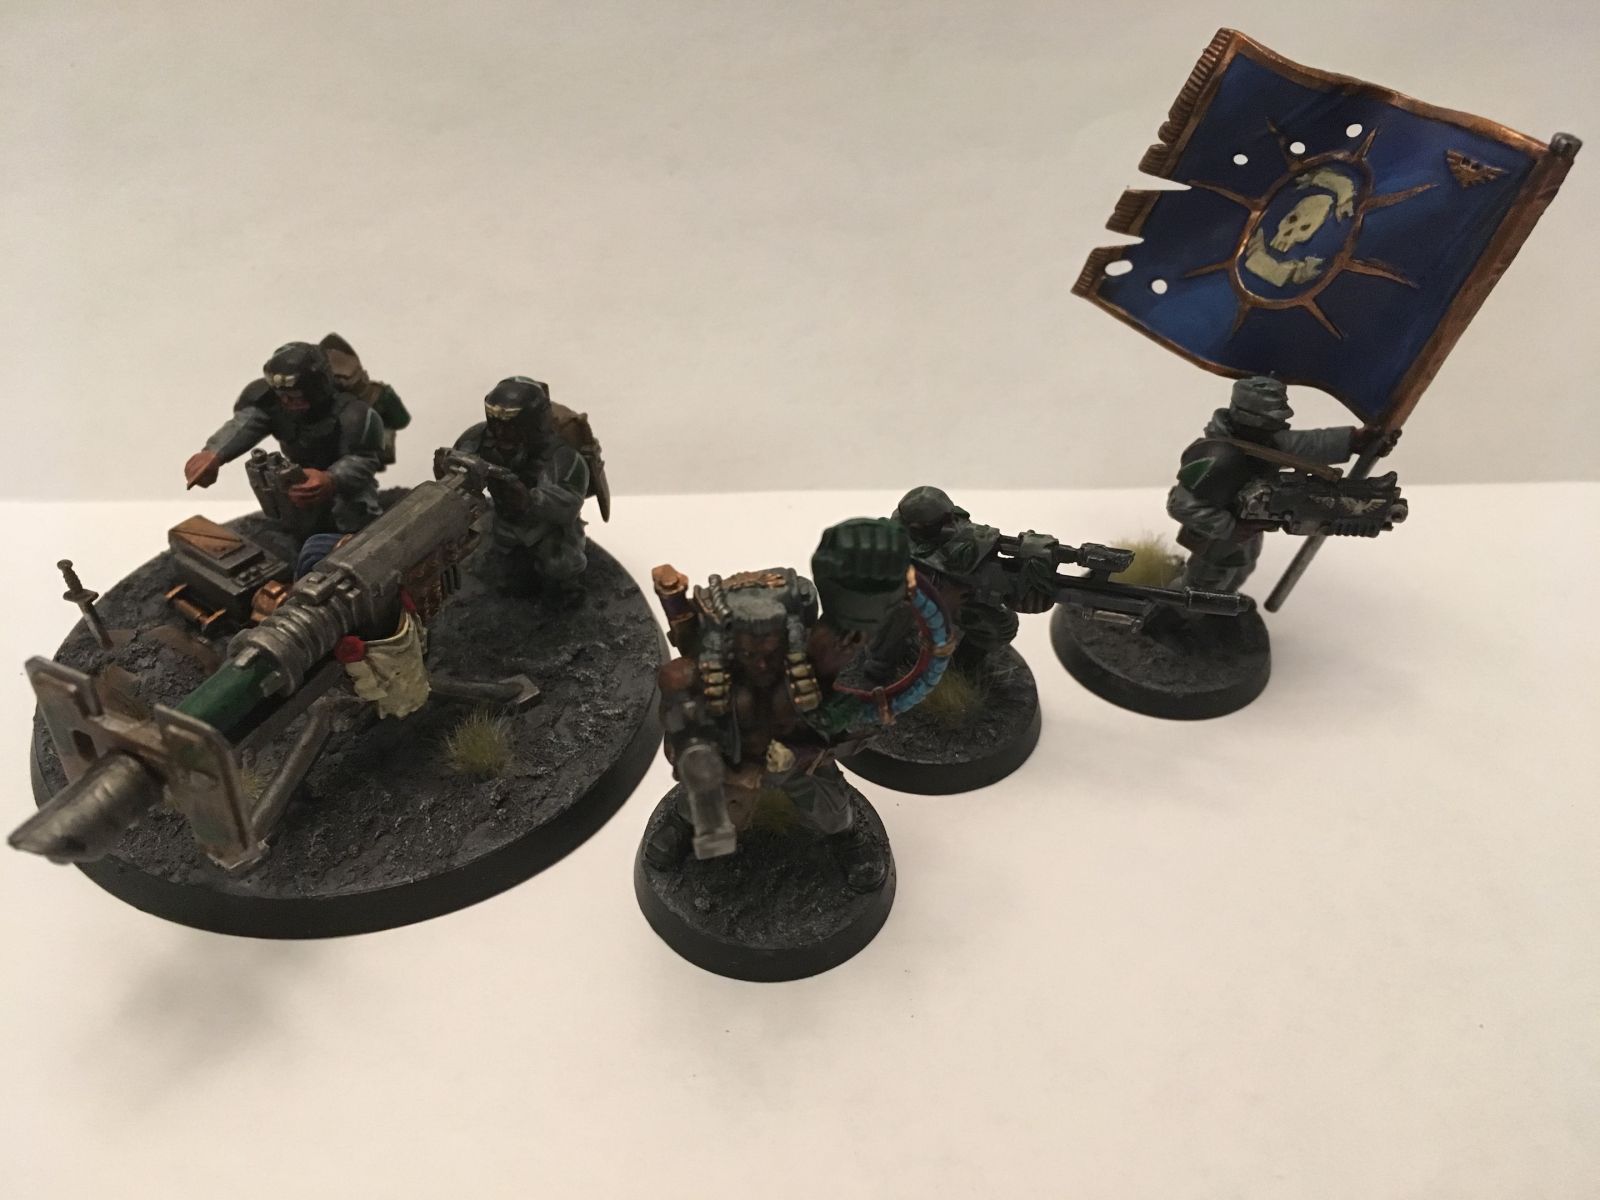 The Carexaen 126th Shock Troop Division